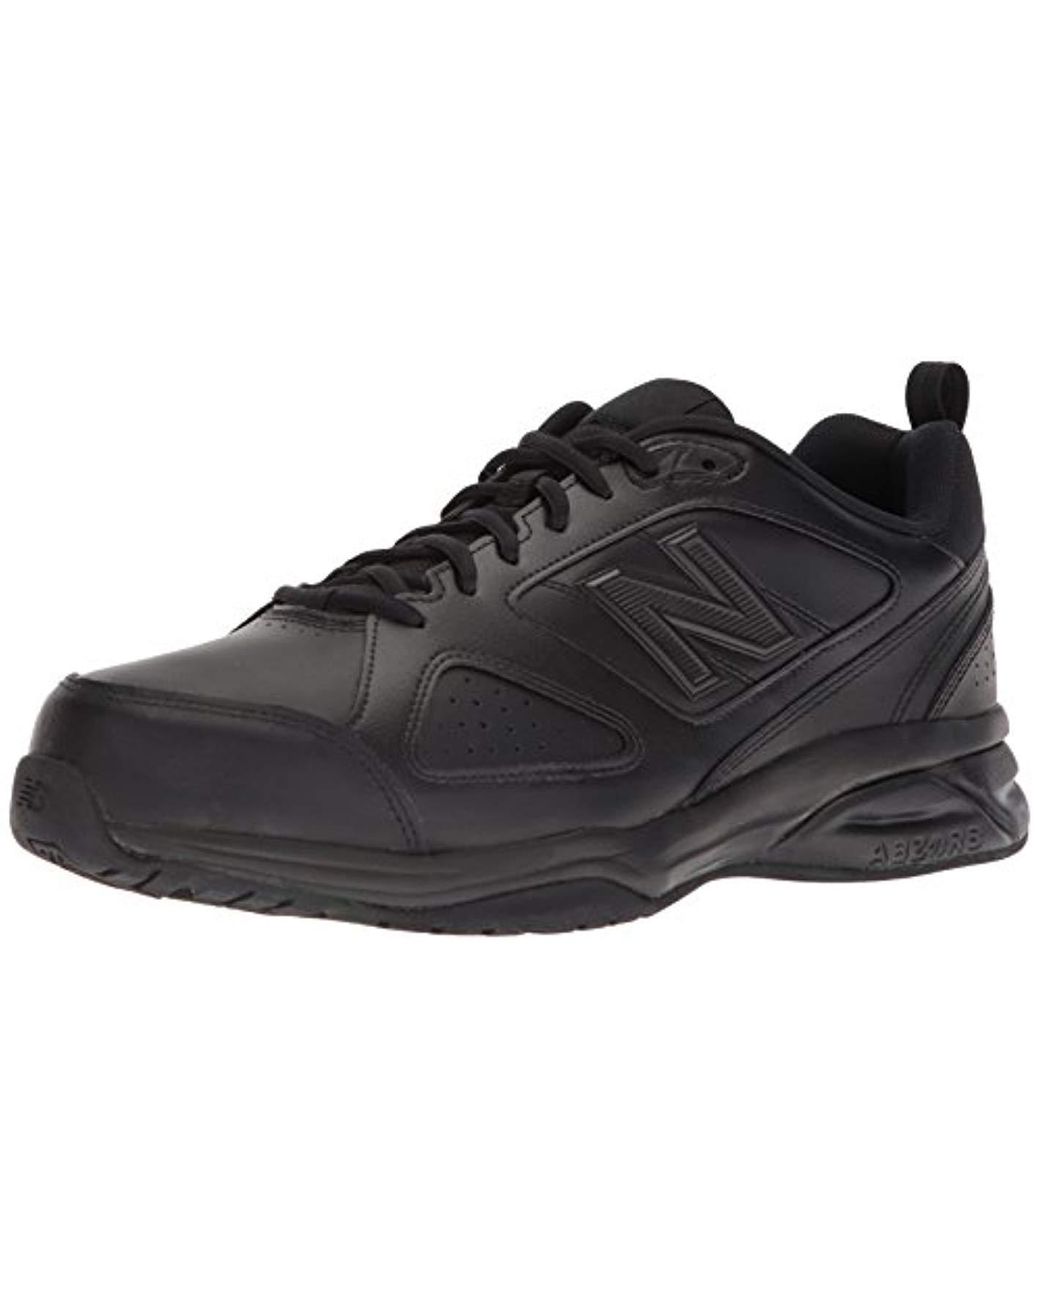 Lyst - New Balance Mx623v3 Casual Comfort Training Shoe in Black for ...